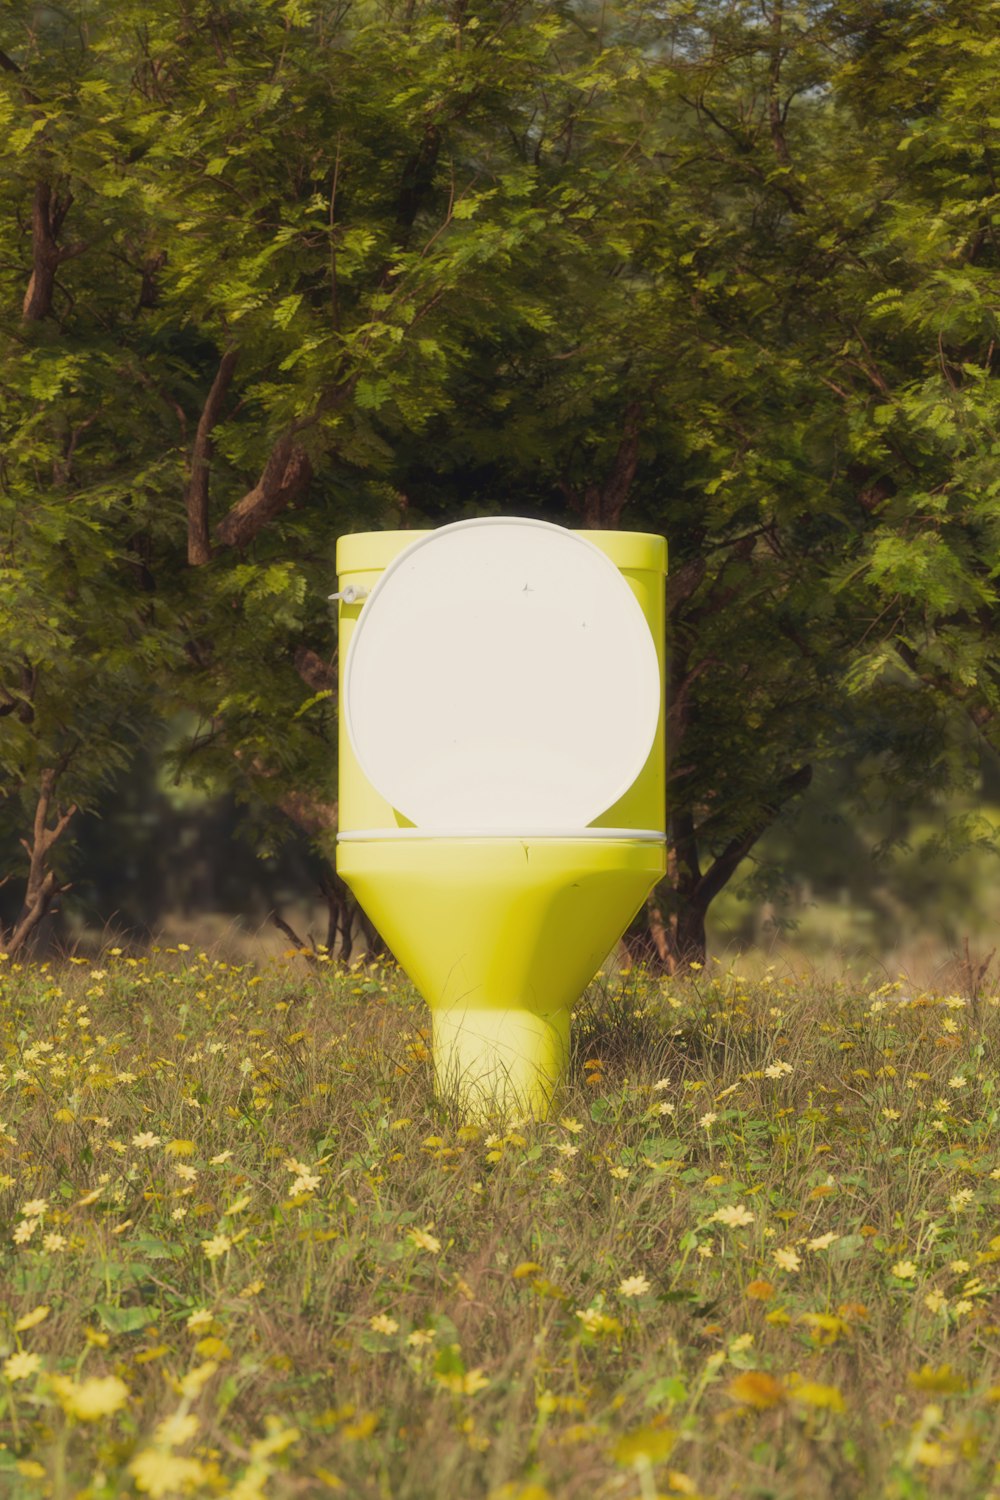 a yellow toilet sitting in the middle of a field